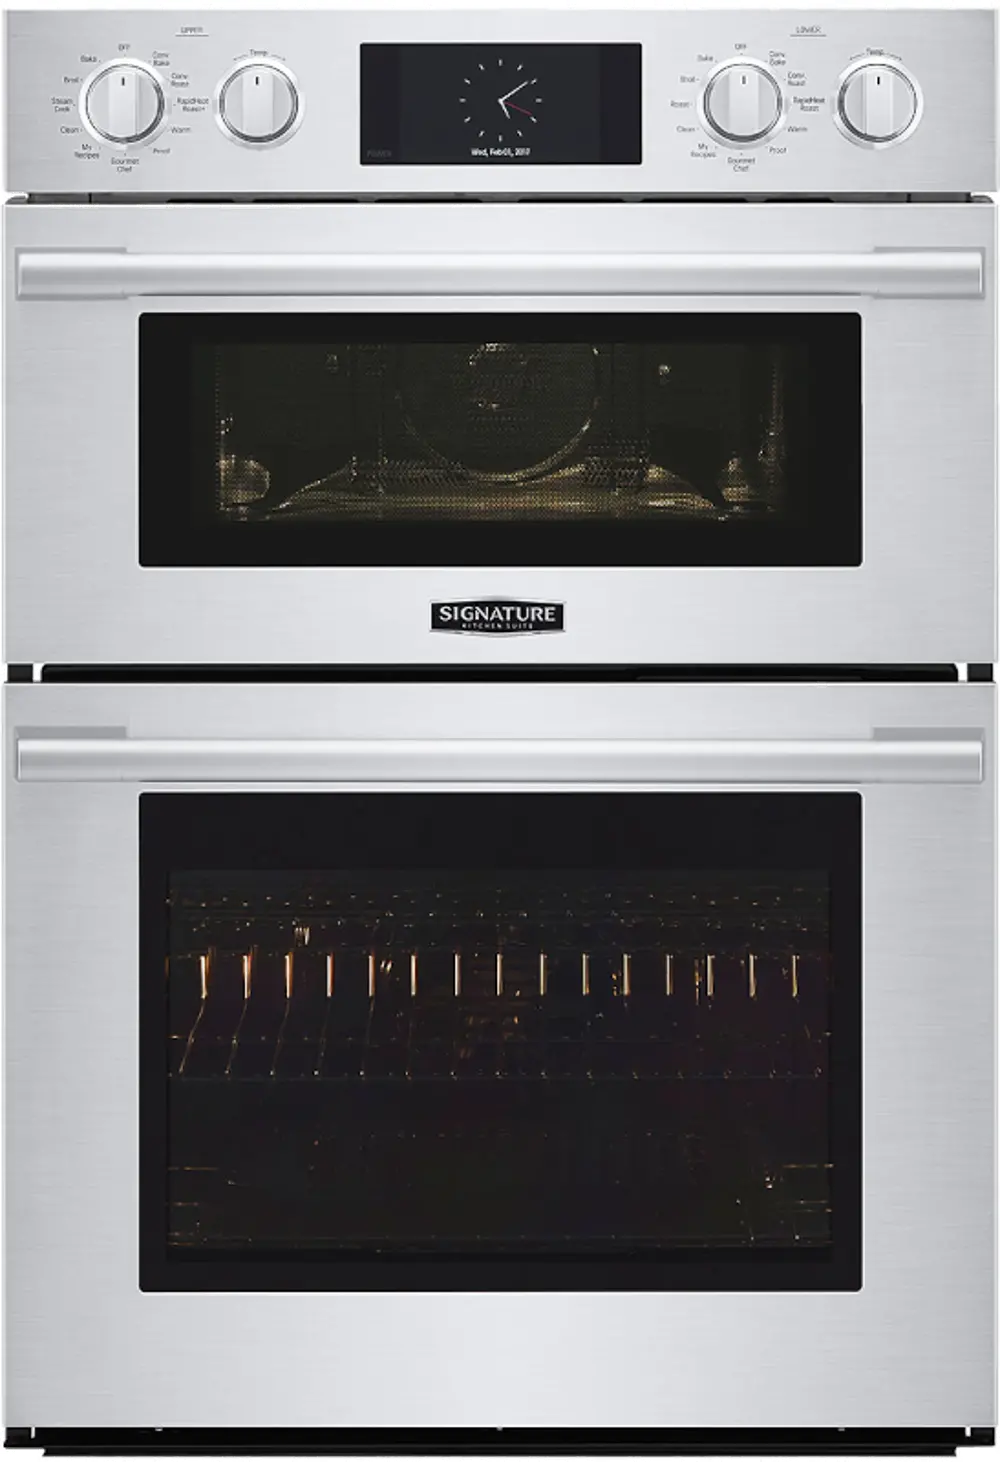 SKSCV3002S Signature Kitchen Suites 6.4 cu ft Combination Wall Oven - Stainless Steel 30 Inch-1